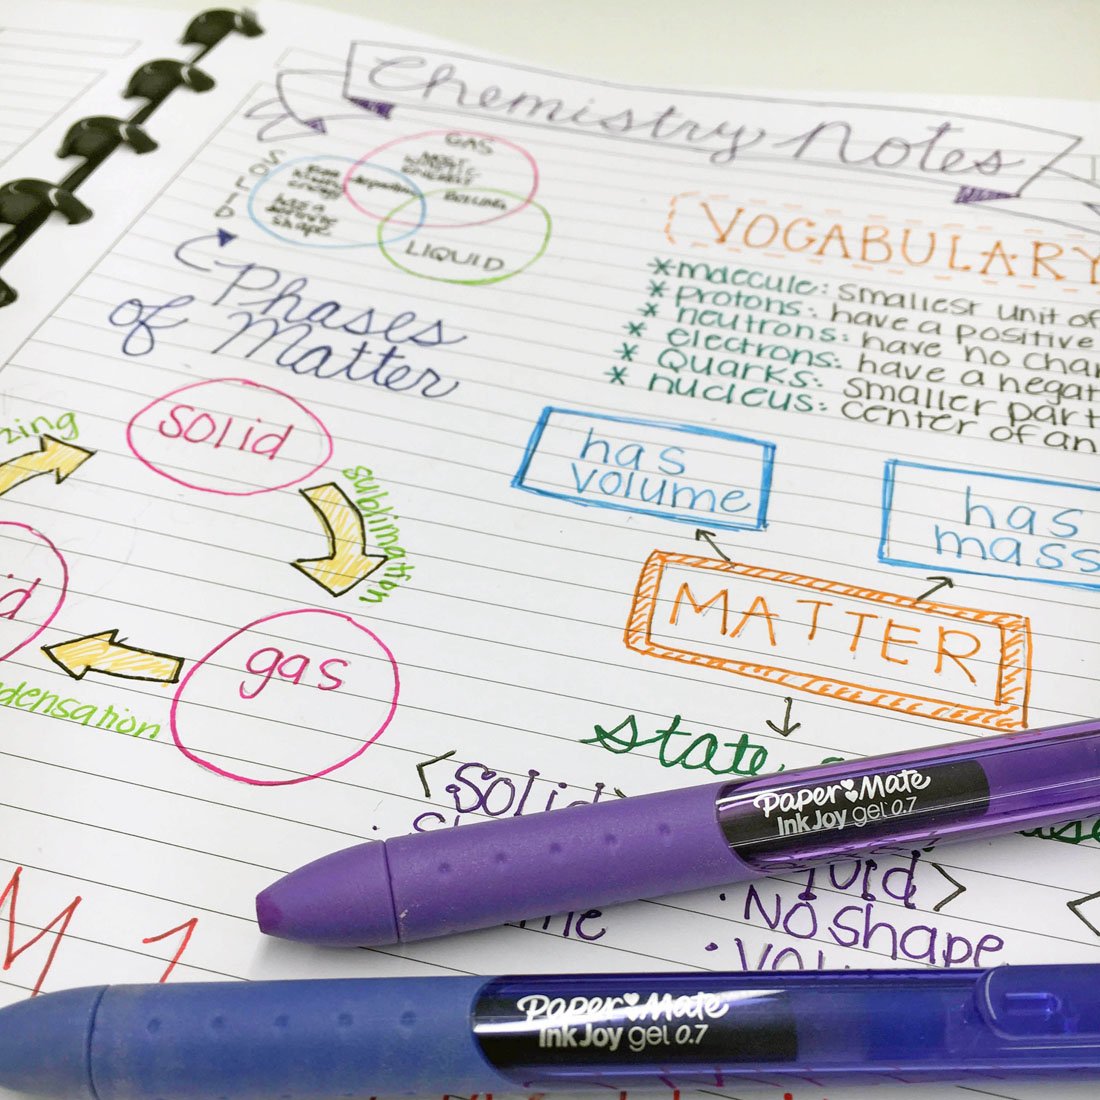 https://s7d9.scene7.com/is/image/NewellRubbermaid/doodled-chemistry-notes-with-papermate-inkjoy-gel-pens?fmt=jpeg